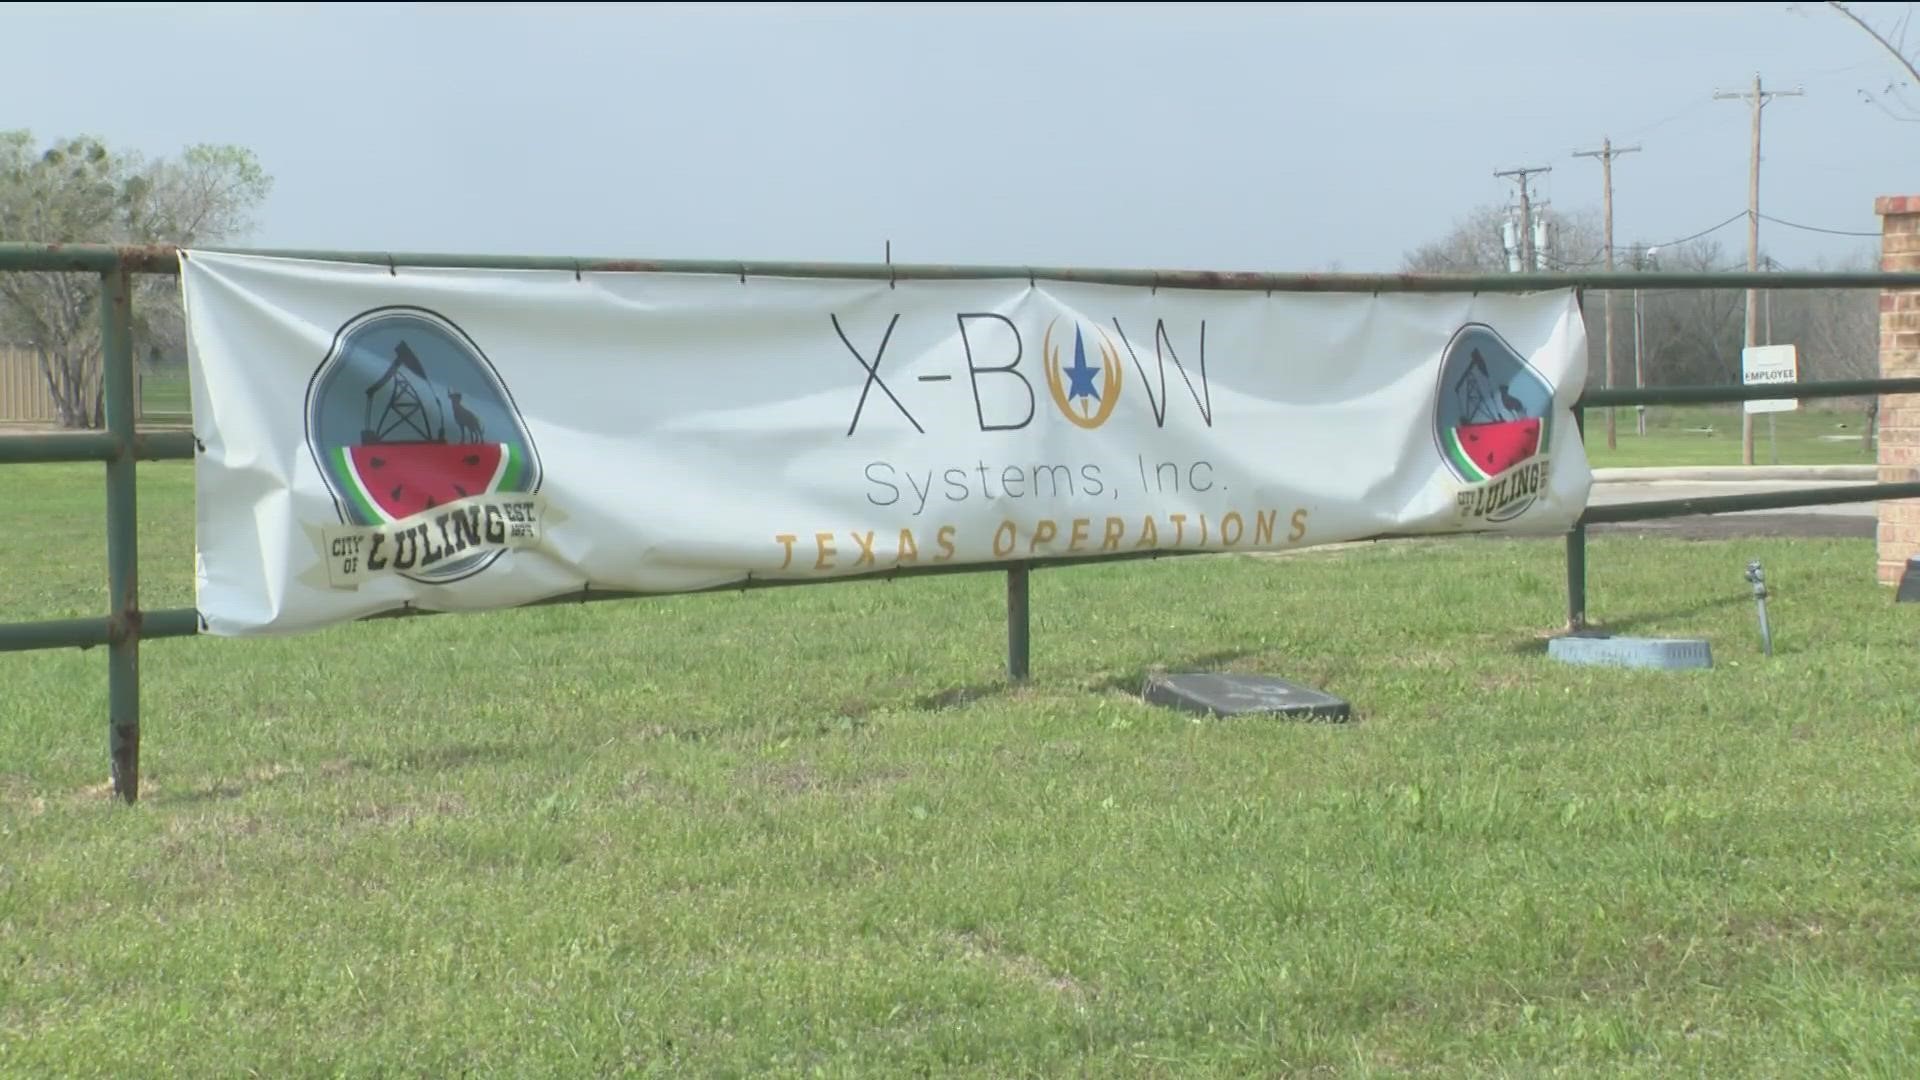 A rocket motor manufacturing company called X-Bow Systems is coming to Luling, bringing hundreds of jobs to Caldwell County.